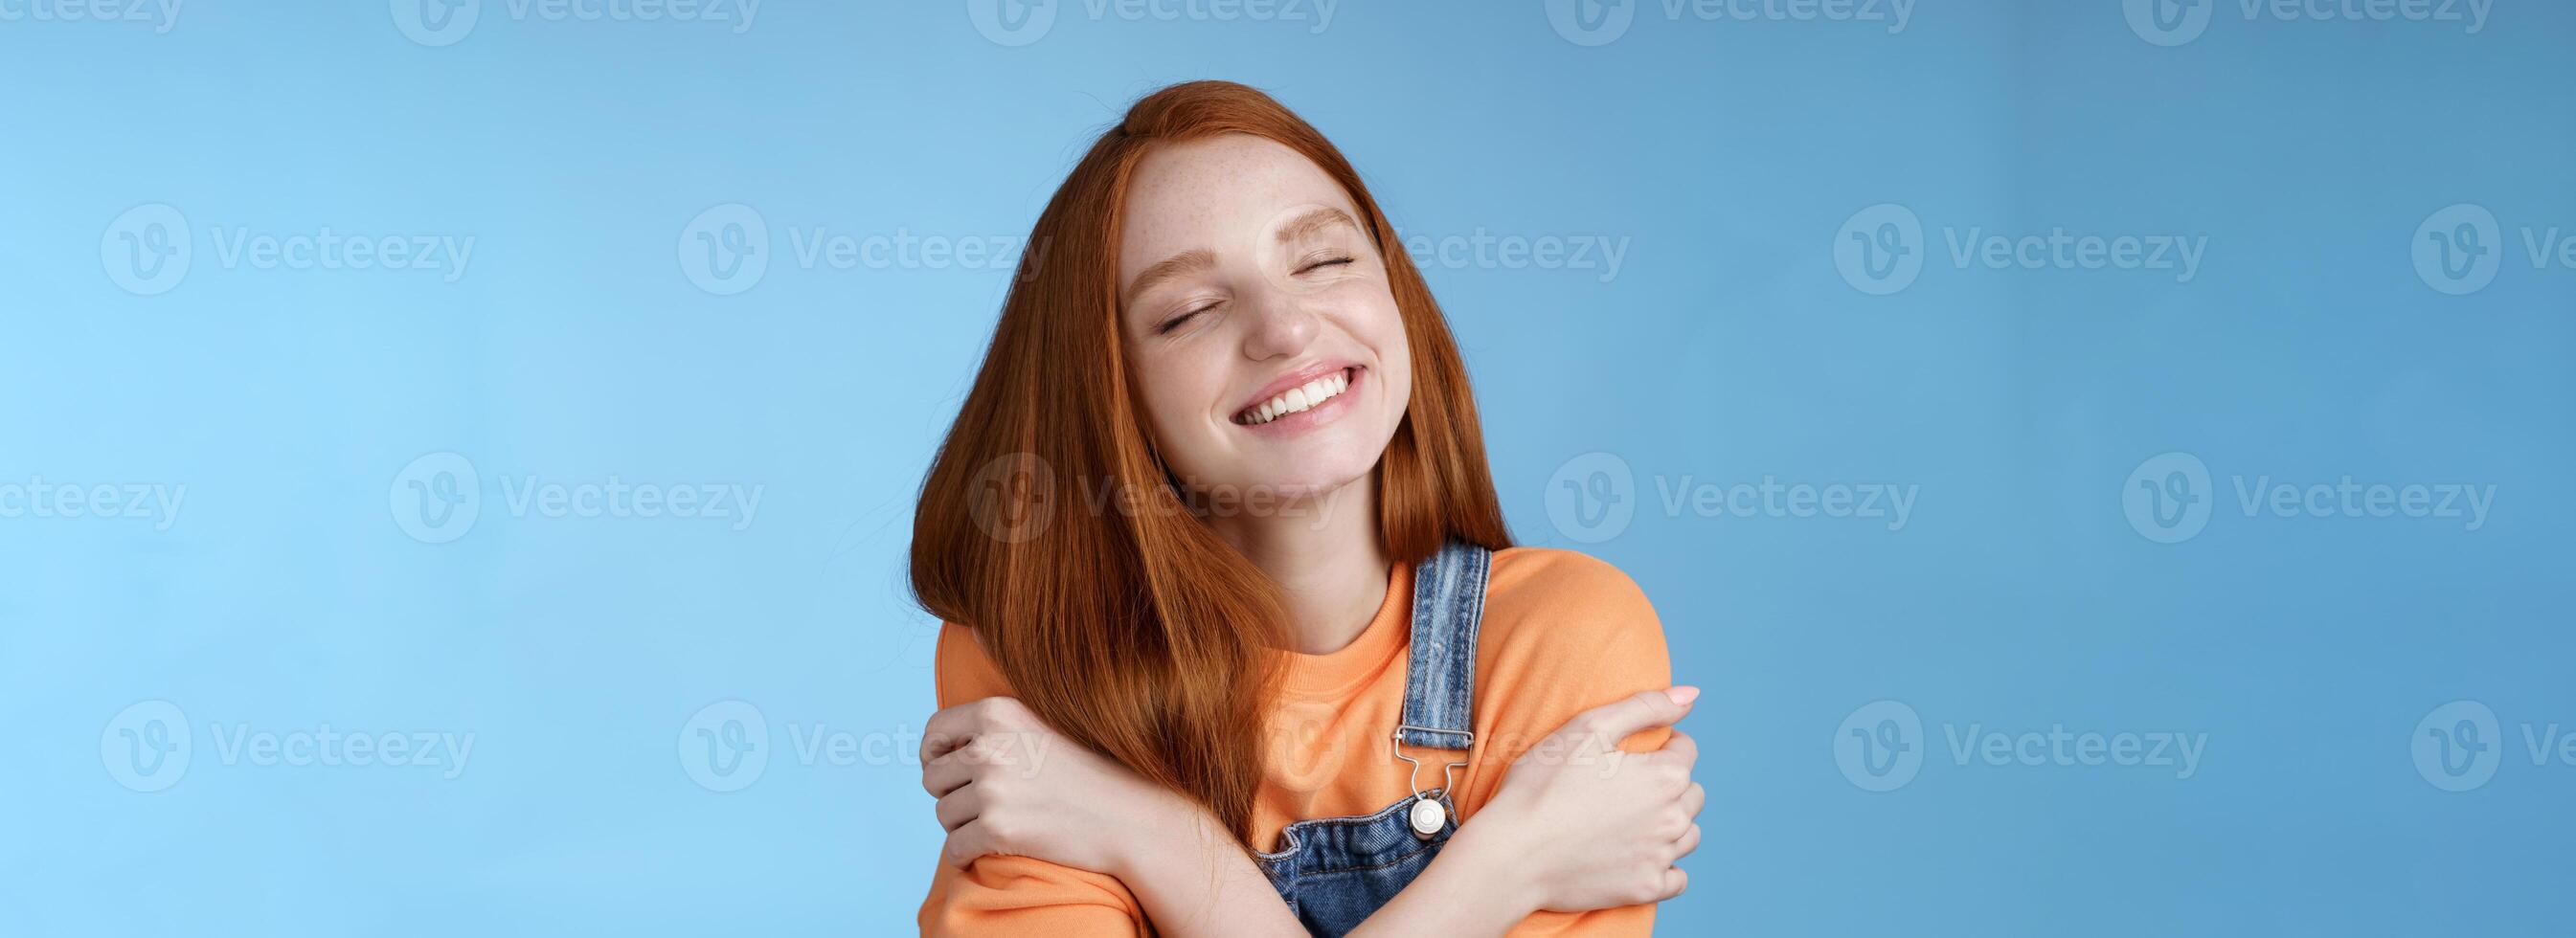 Close-up dreamy happy smiling redhead girl close eyes fantasizing romantic date grinning white teeth cuddle herself cross arms chest embracing recalling lovely memories hugging daydreaming photo